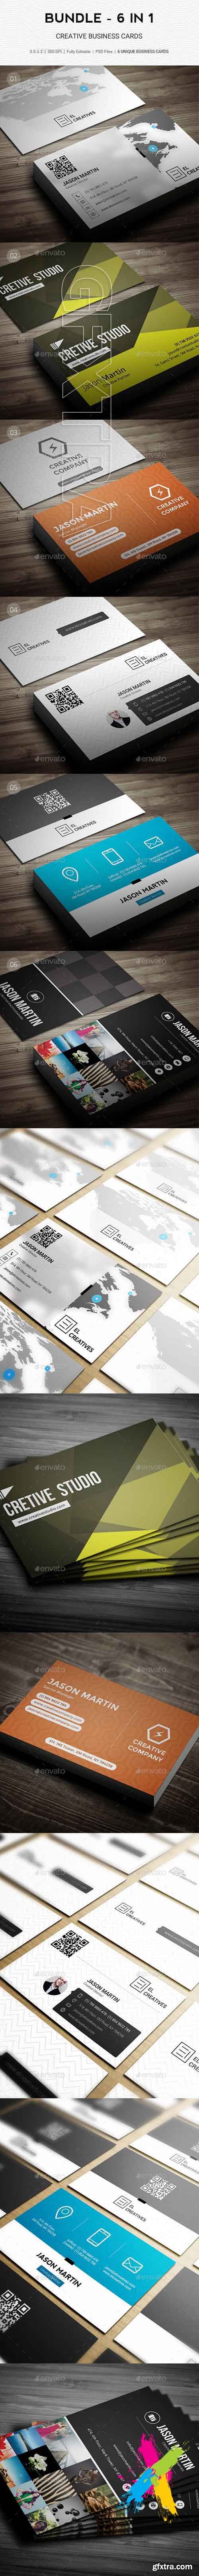 GraphicRiver - Bundle - 6 in 1 - Pro Creative Business Cards - B52 20621791